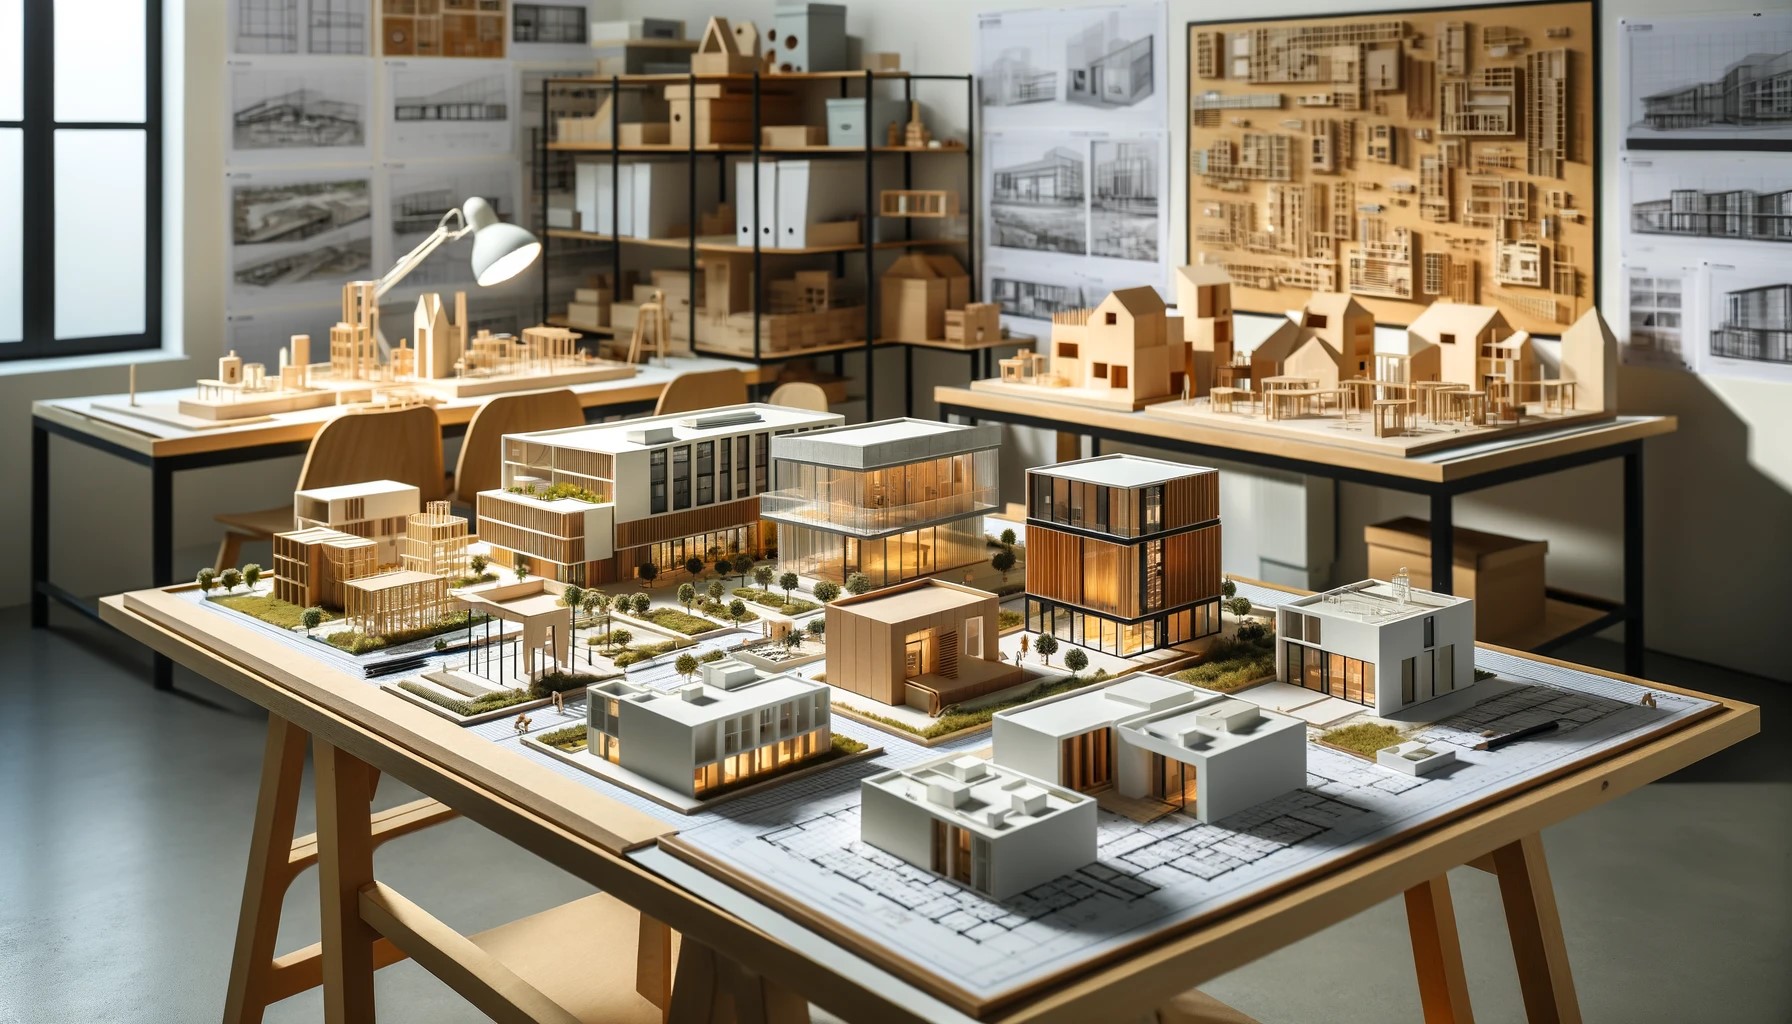 Architectural studio displaying diverse scale models made from wood, acrylic, and foam core, showcasing the art of model making with tools and materials in the background